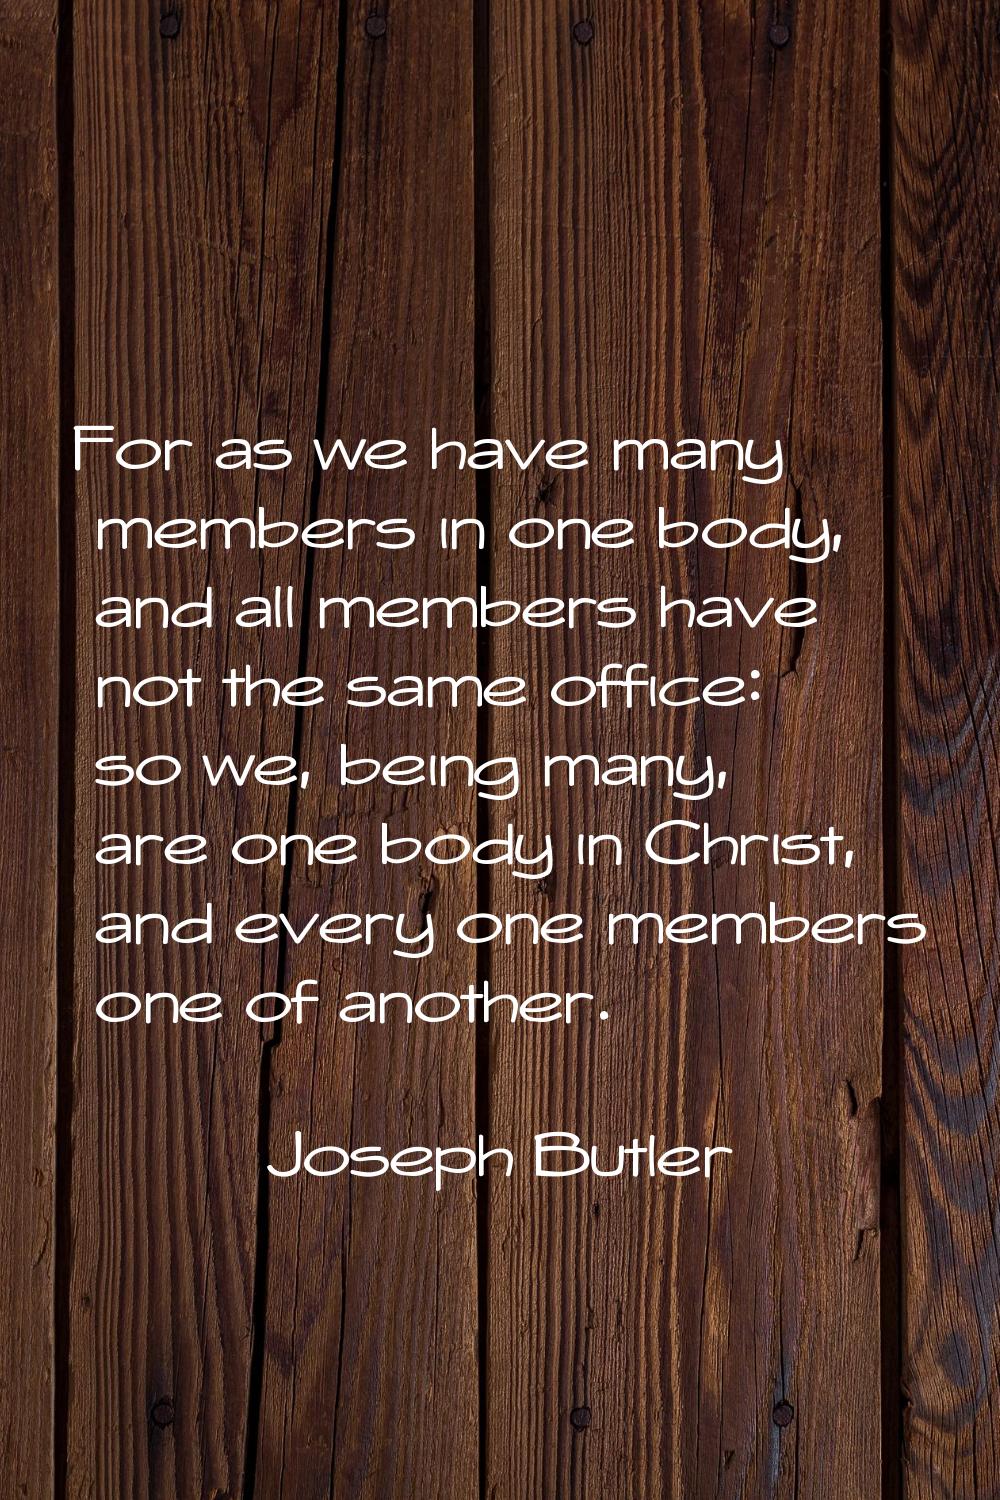 For as we have many members in one body, and all members have not the same office: so we, being man